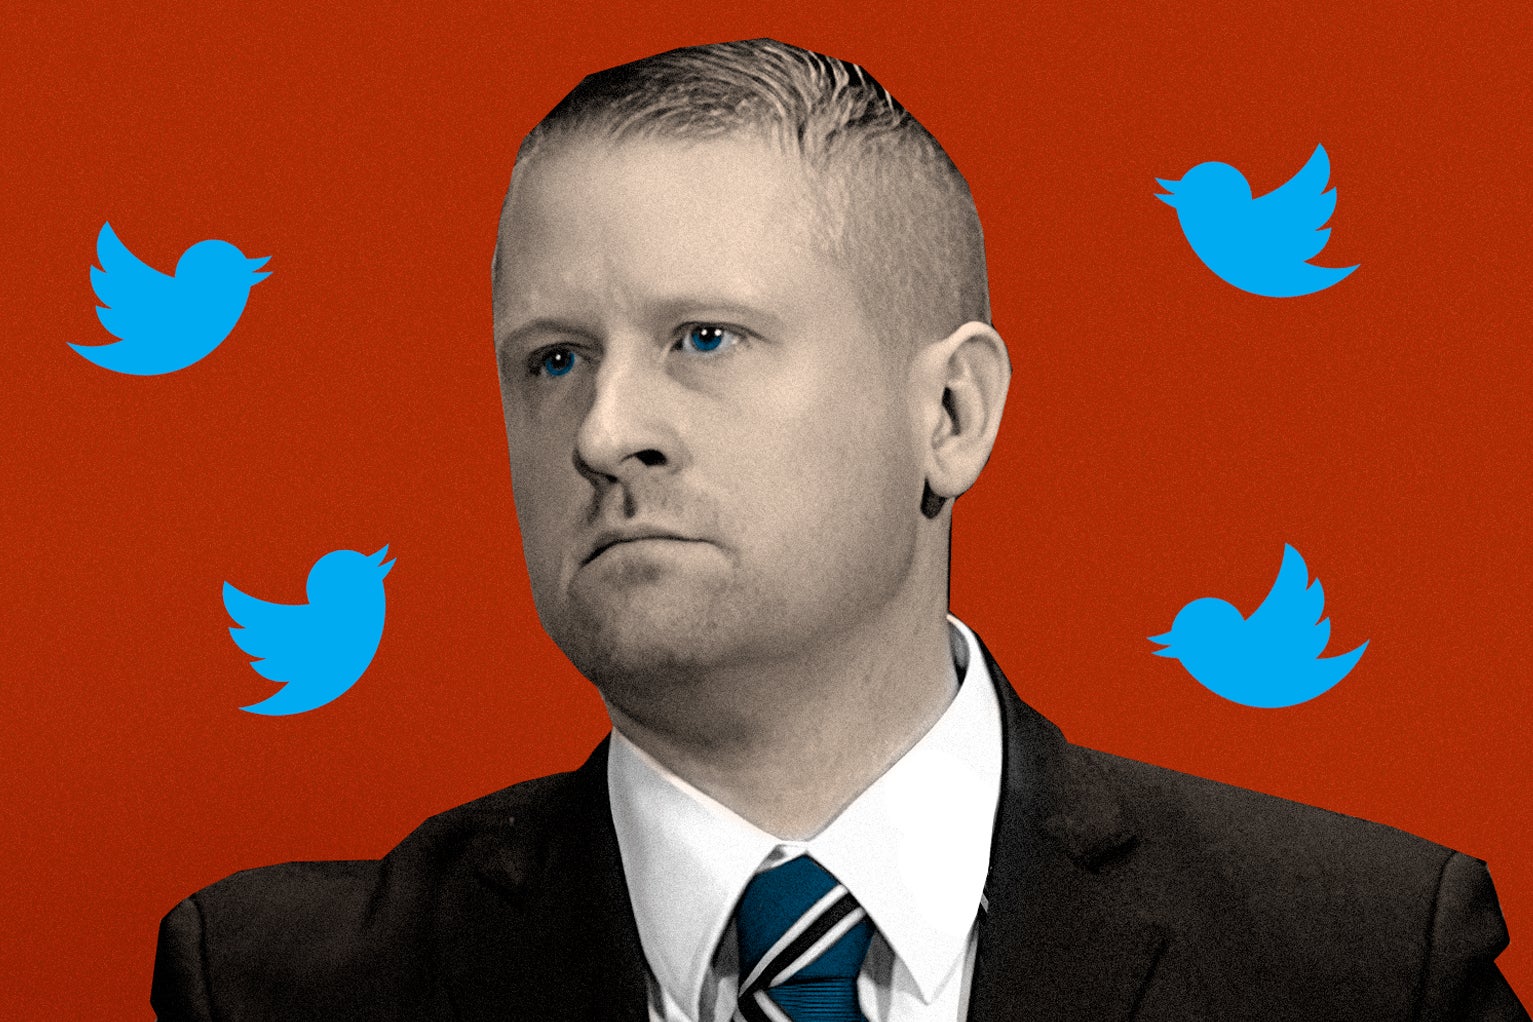 Judge Matthew Kacsmaryk illustrated in a red background surrounded by Twitter birds.